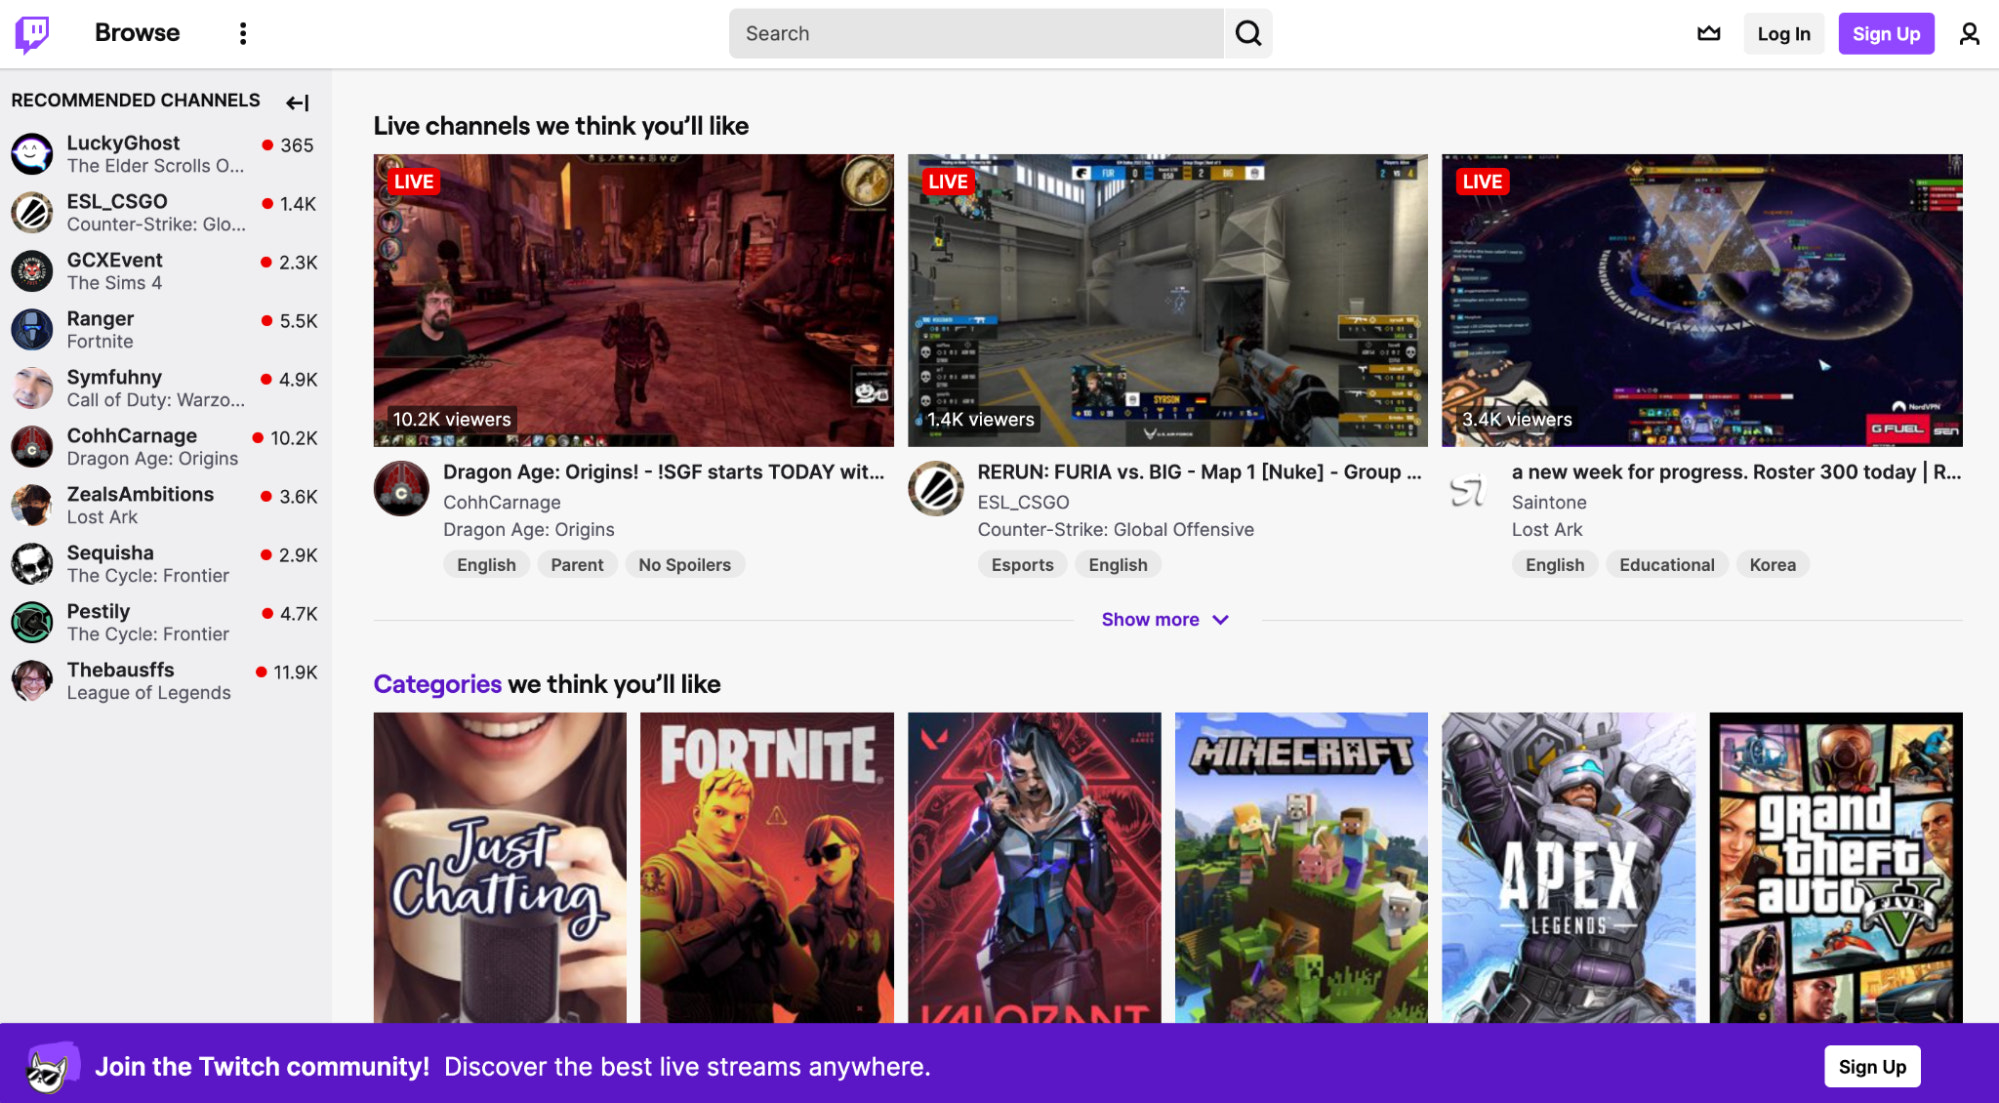 How to stream just chatting on Twitch - Quora